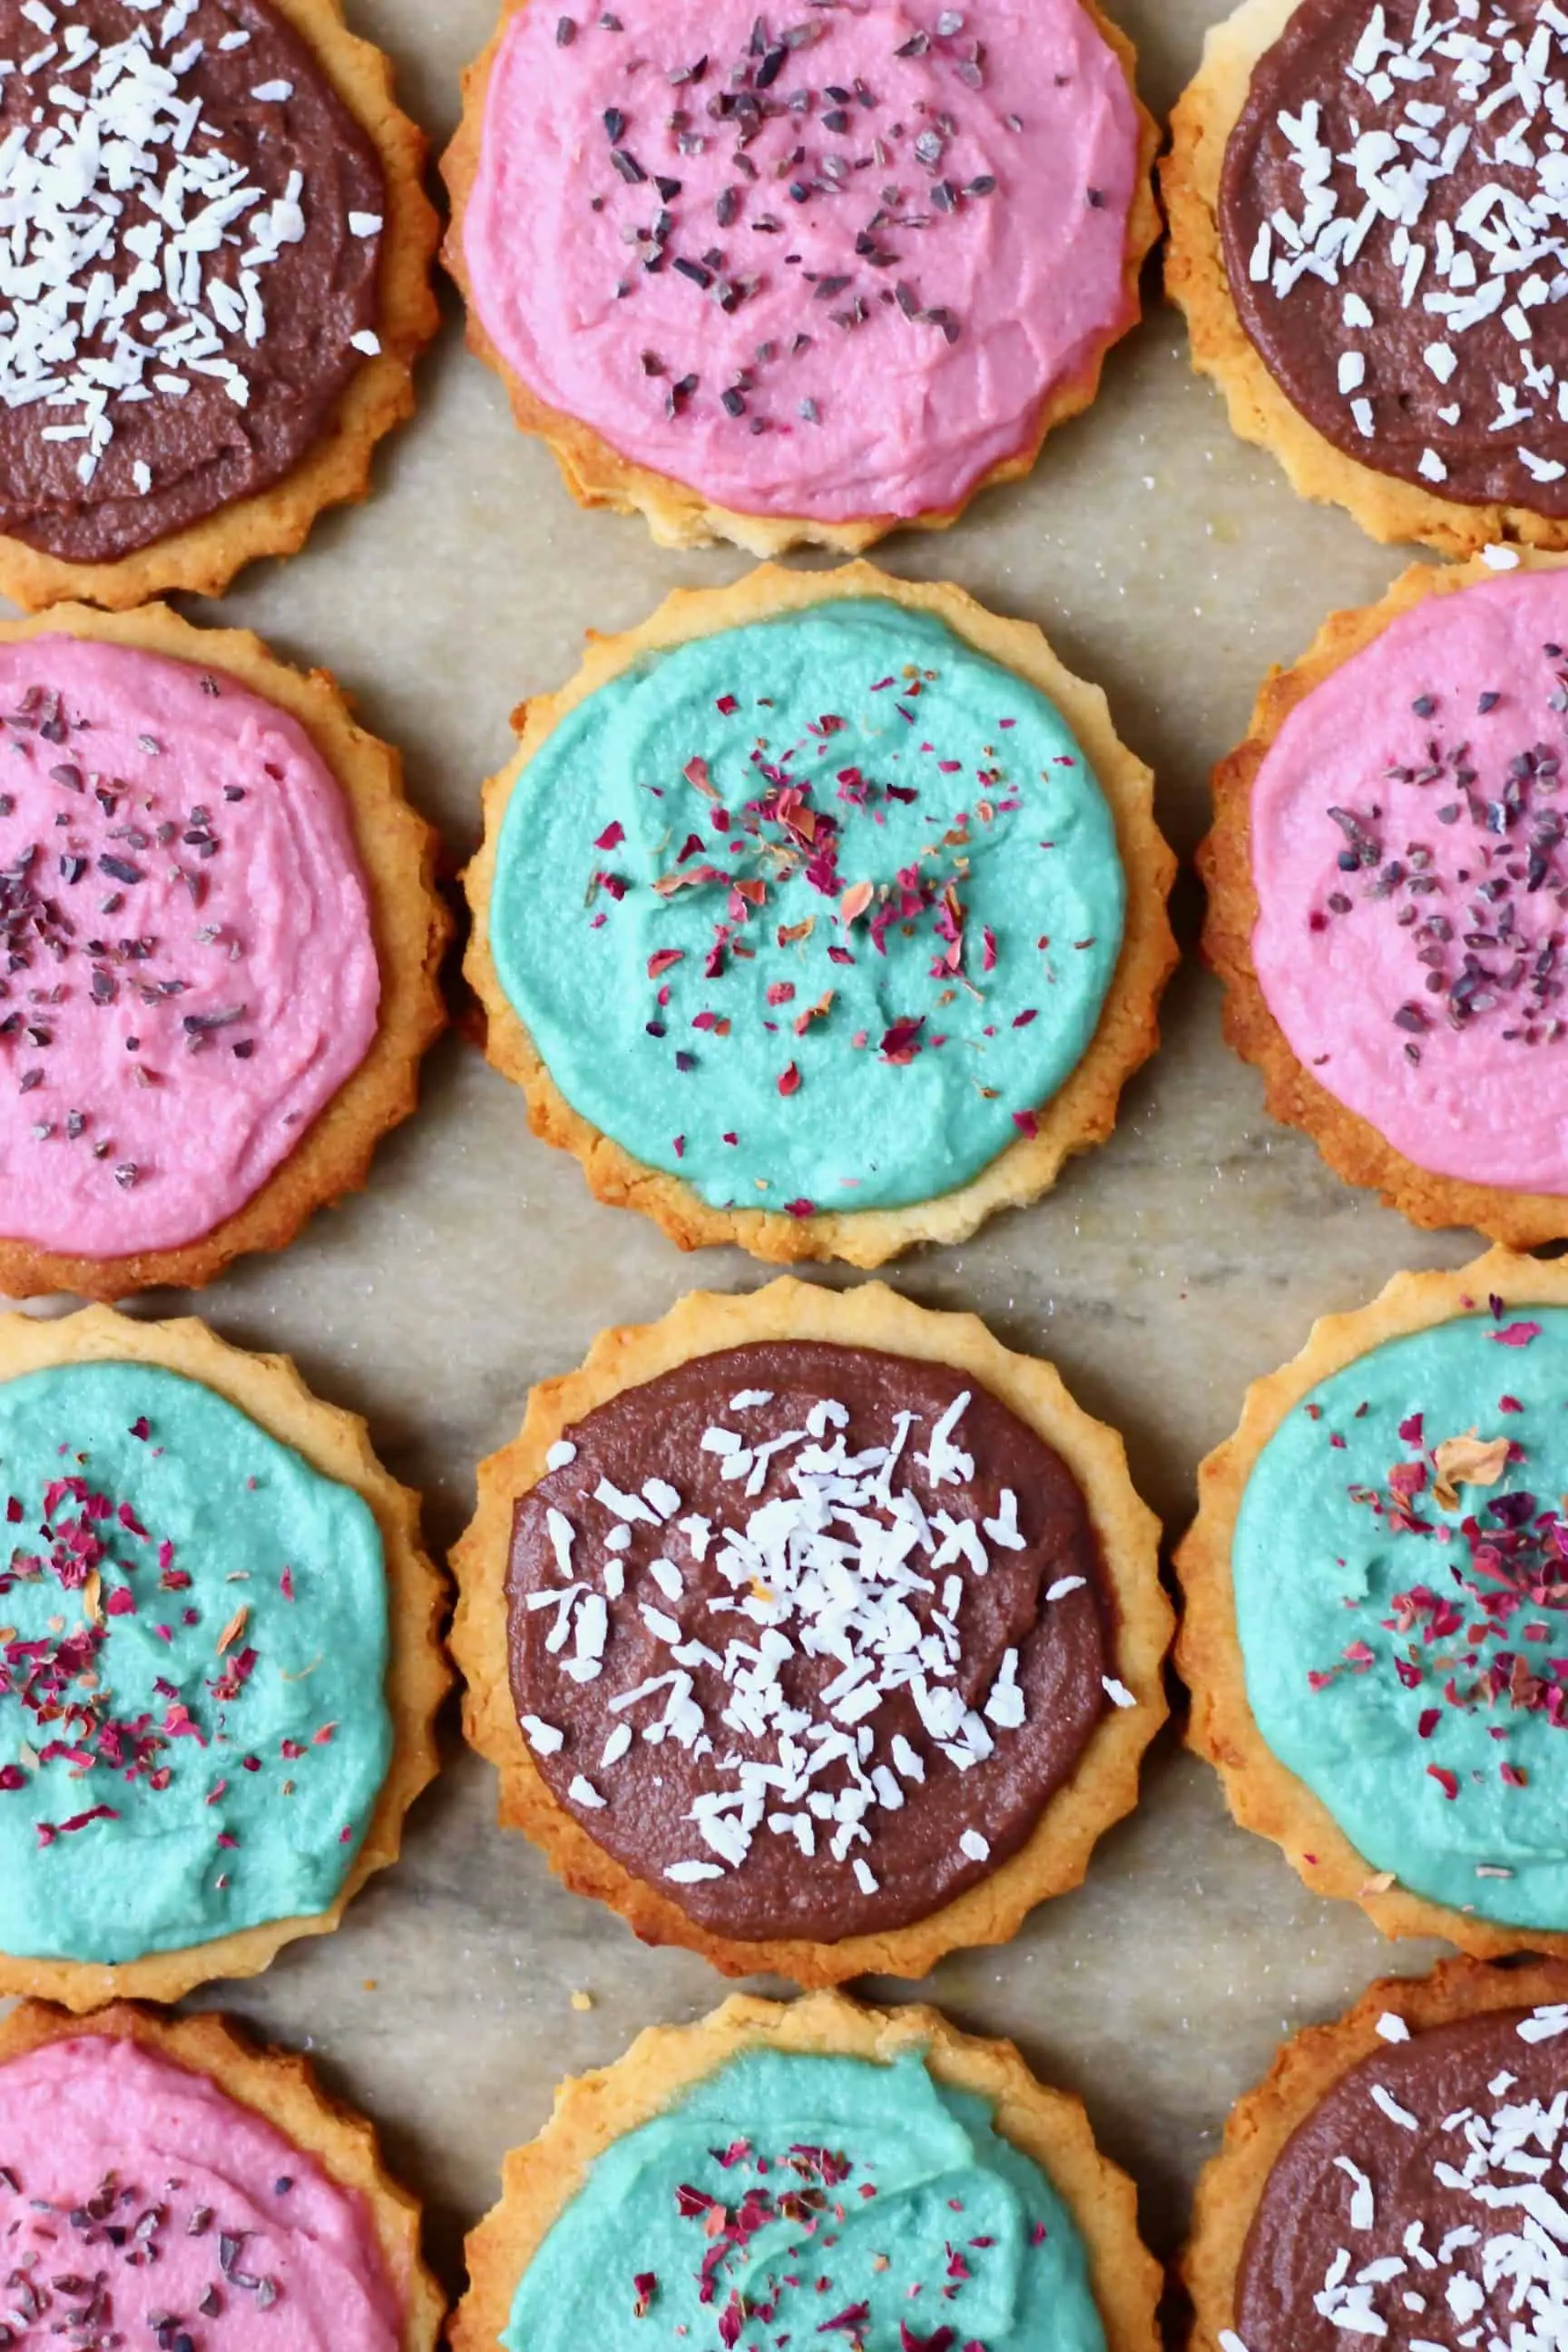 Twelve gluten-free vegan sugar cookies topped with different coloured frosting and sprinkles on a sheet of baking paper